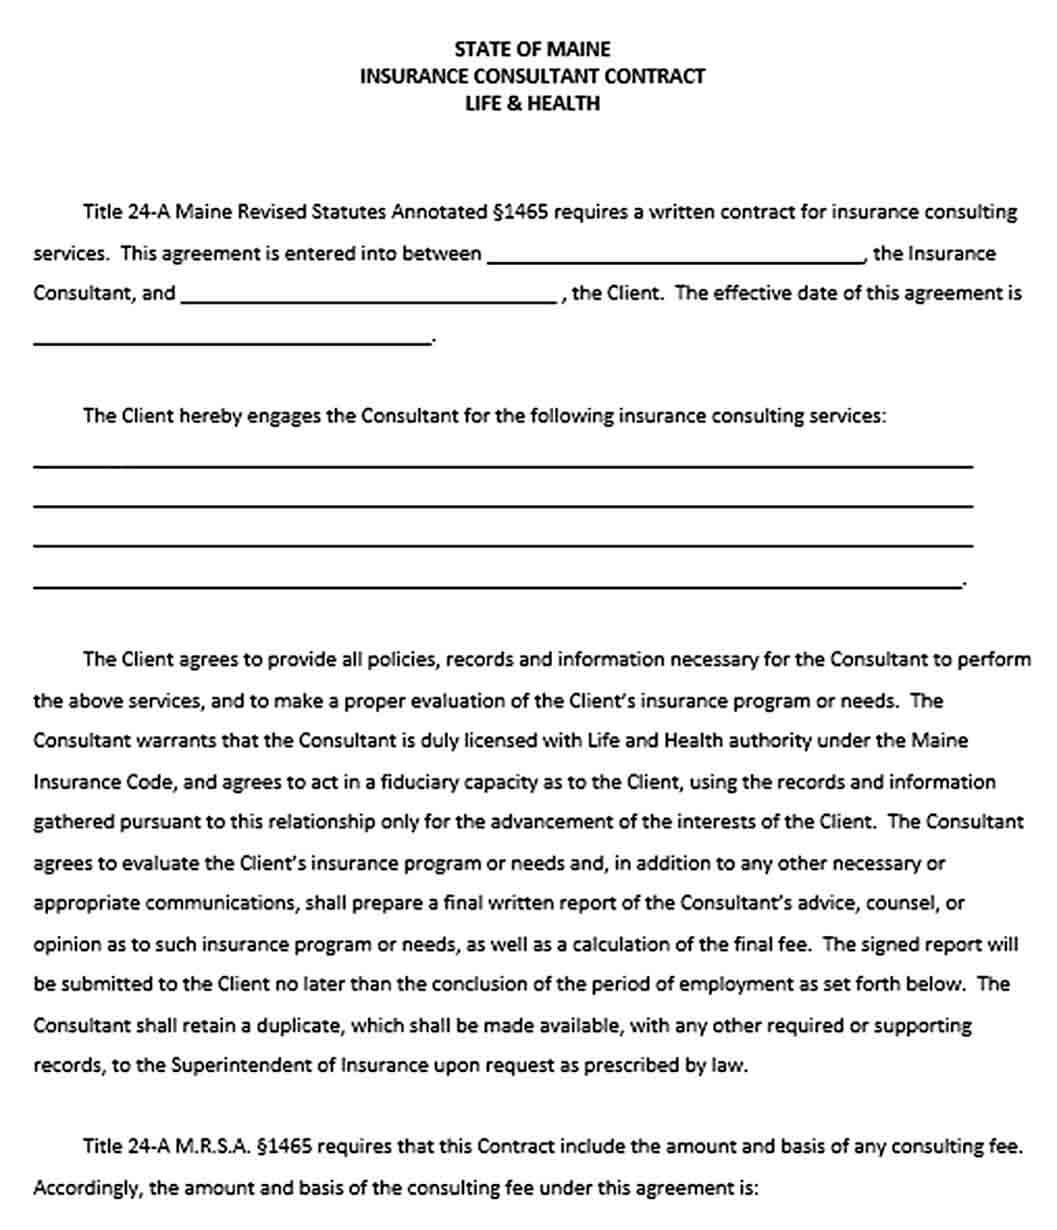 Sample Insurance Consultant Agreement Template in Word